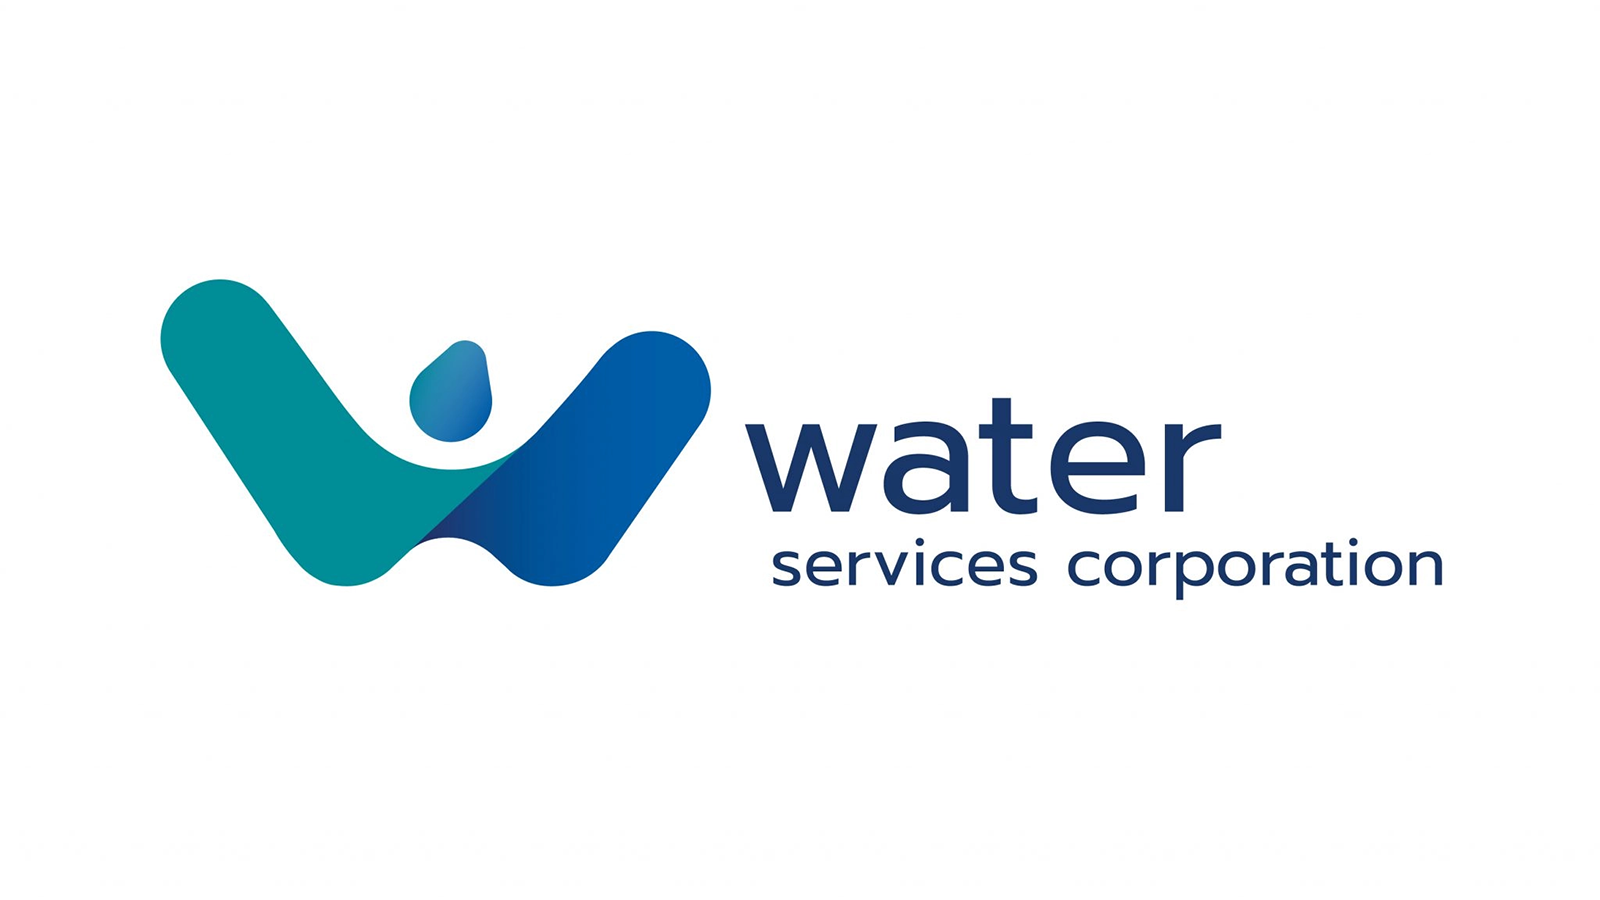 Investment in Malta's Water Infrastructure